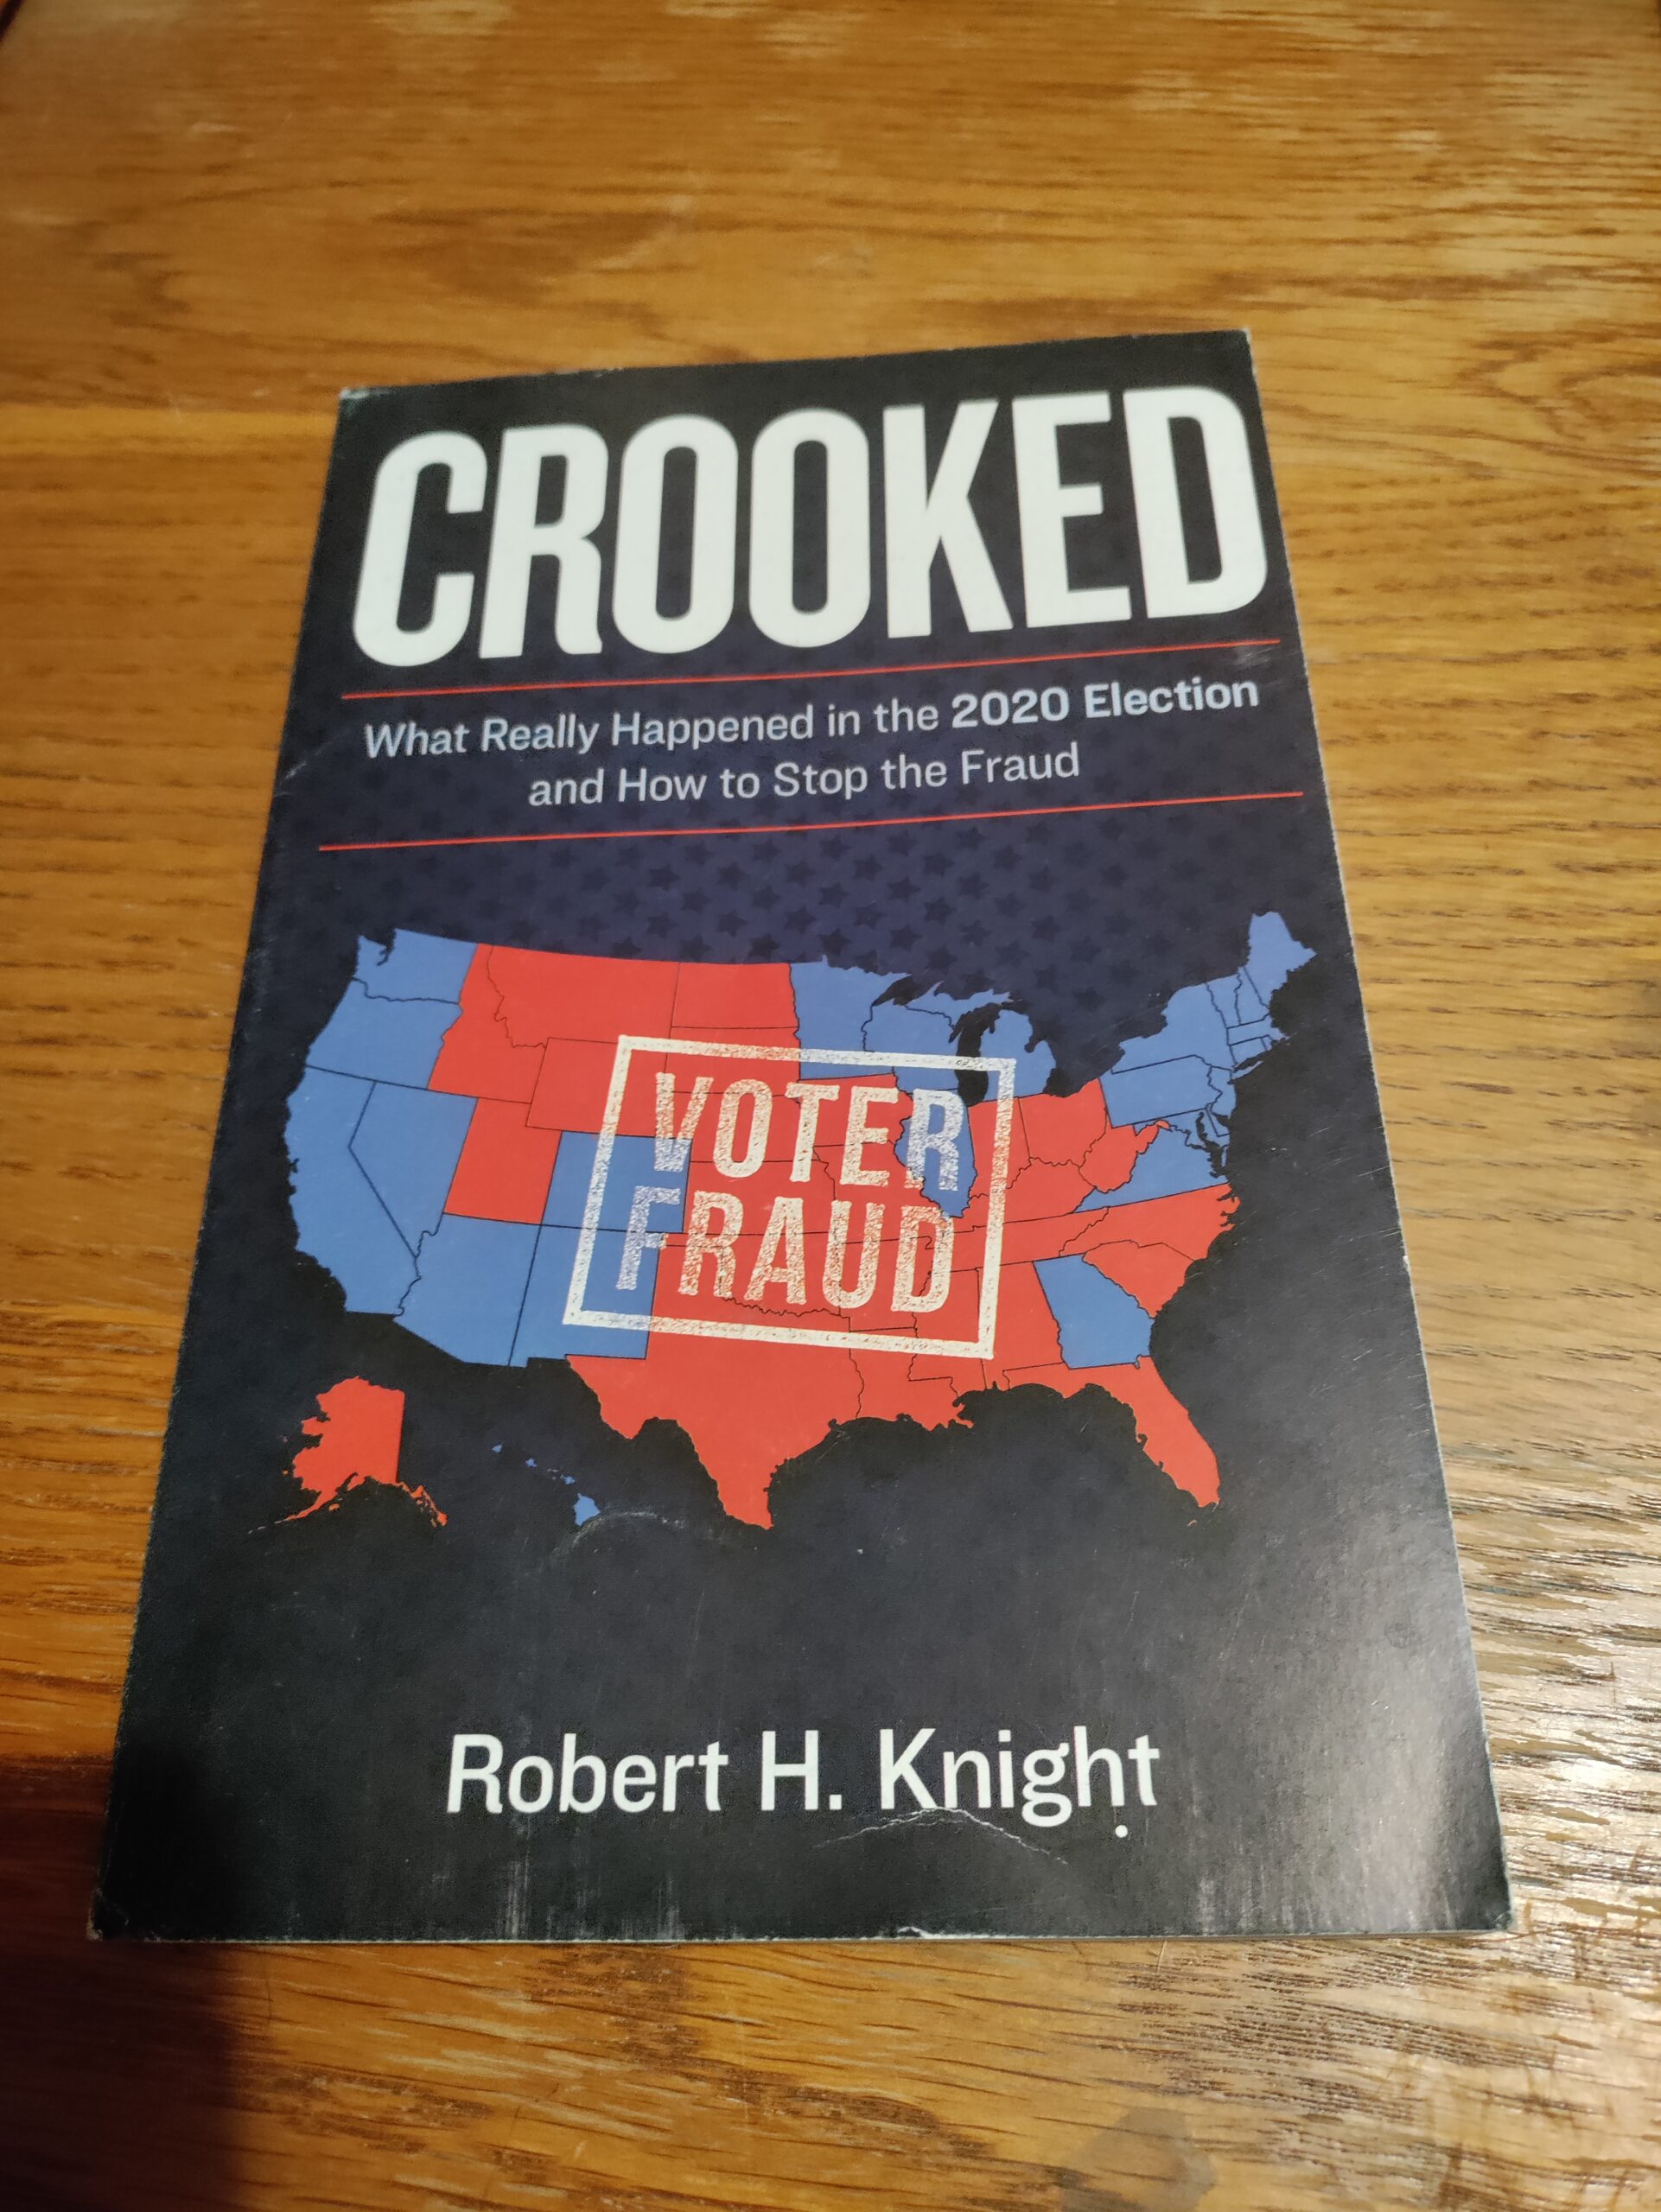 Podcast – Guest Robert Knight; Discussing his Book Crooked, What Really Happened in the 2020 Election and How to Stop the Fraud